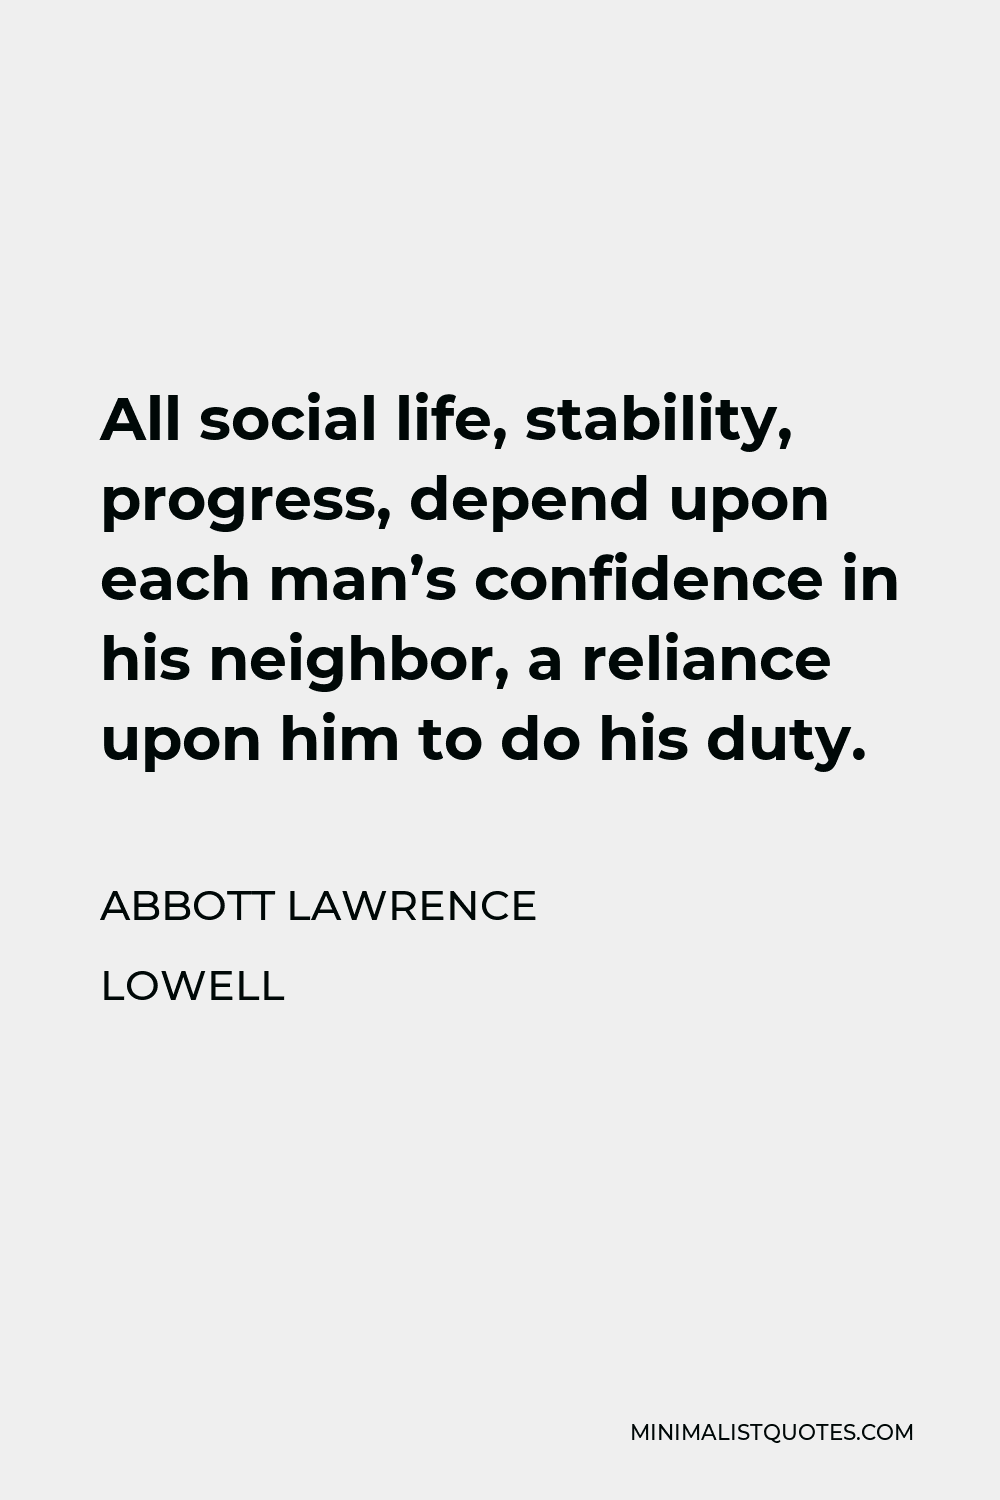 Abbott Lawrence Lowell Quote - All social life, stability, progress, depend upon each man’s confidence in his neighbor, a reliance upon him to do his duty.